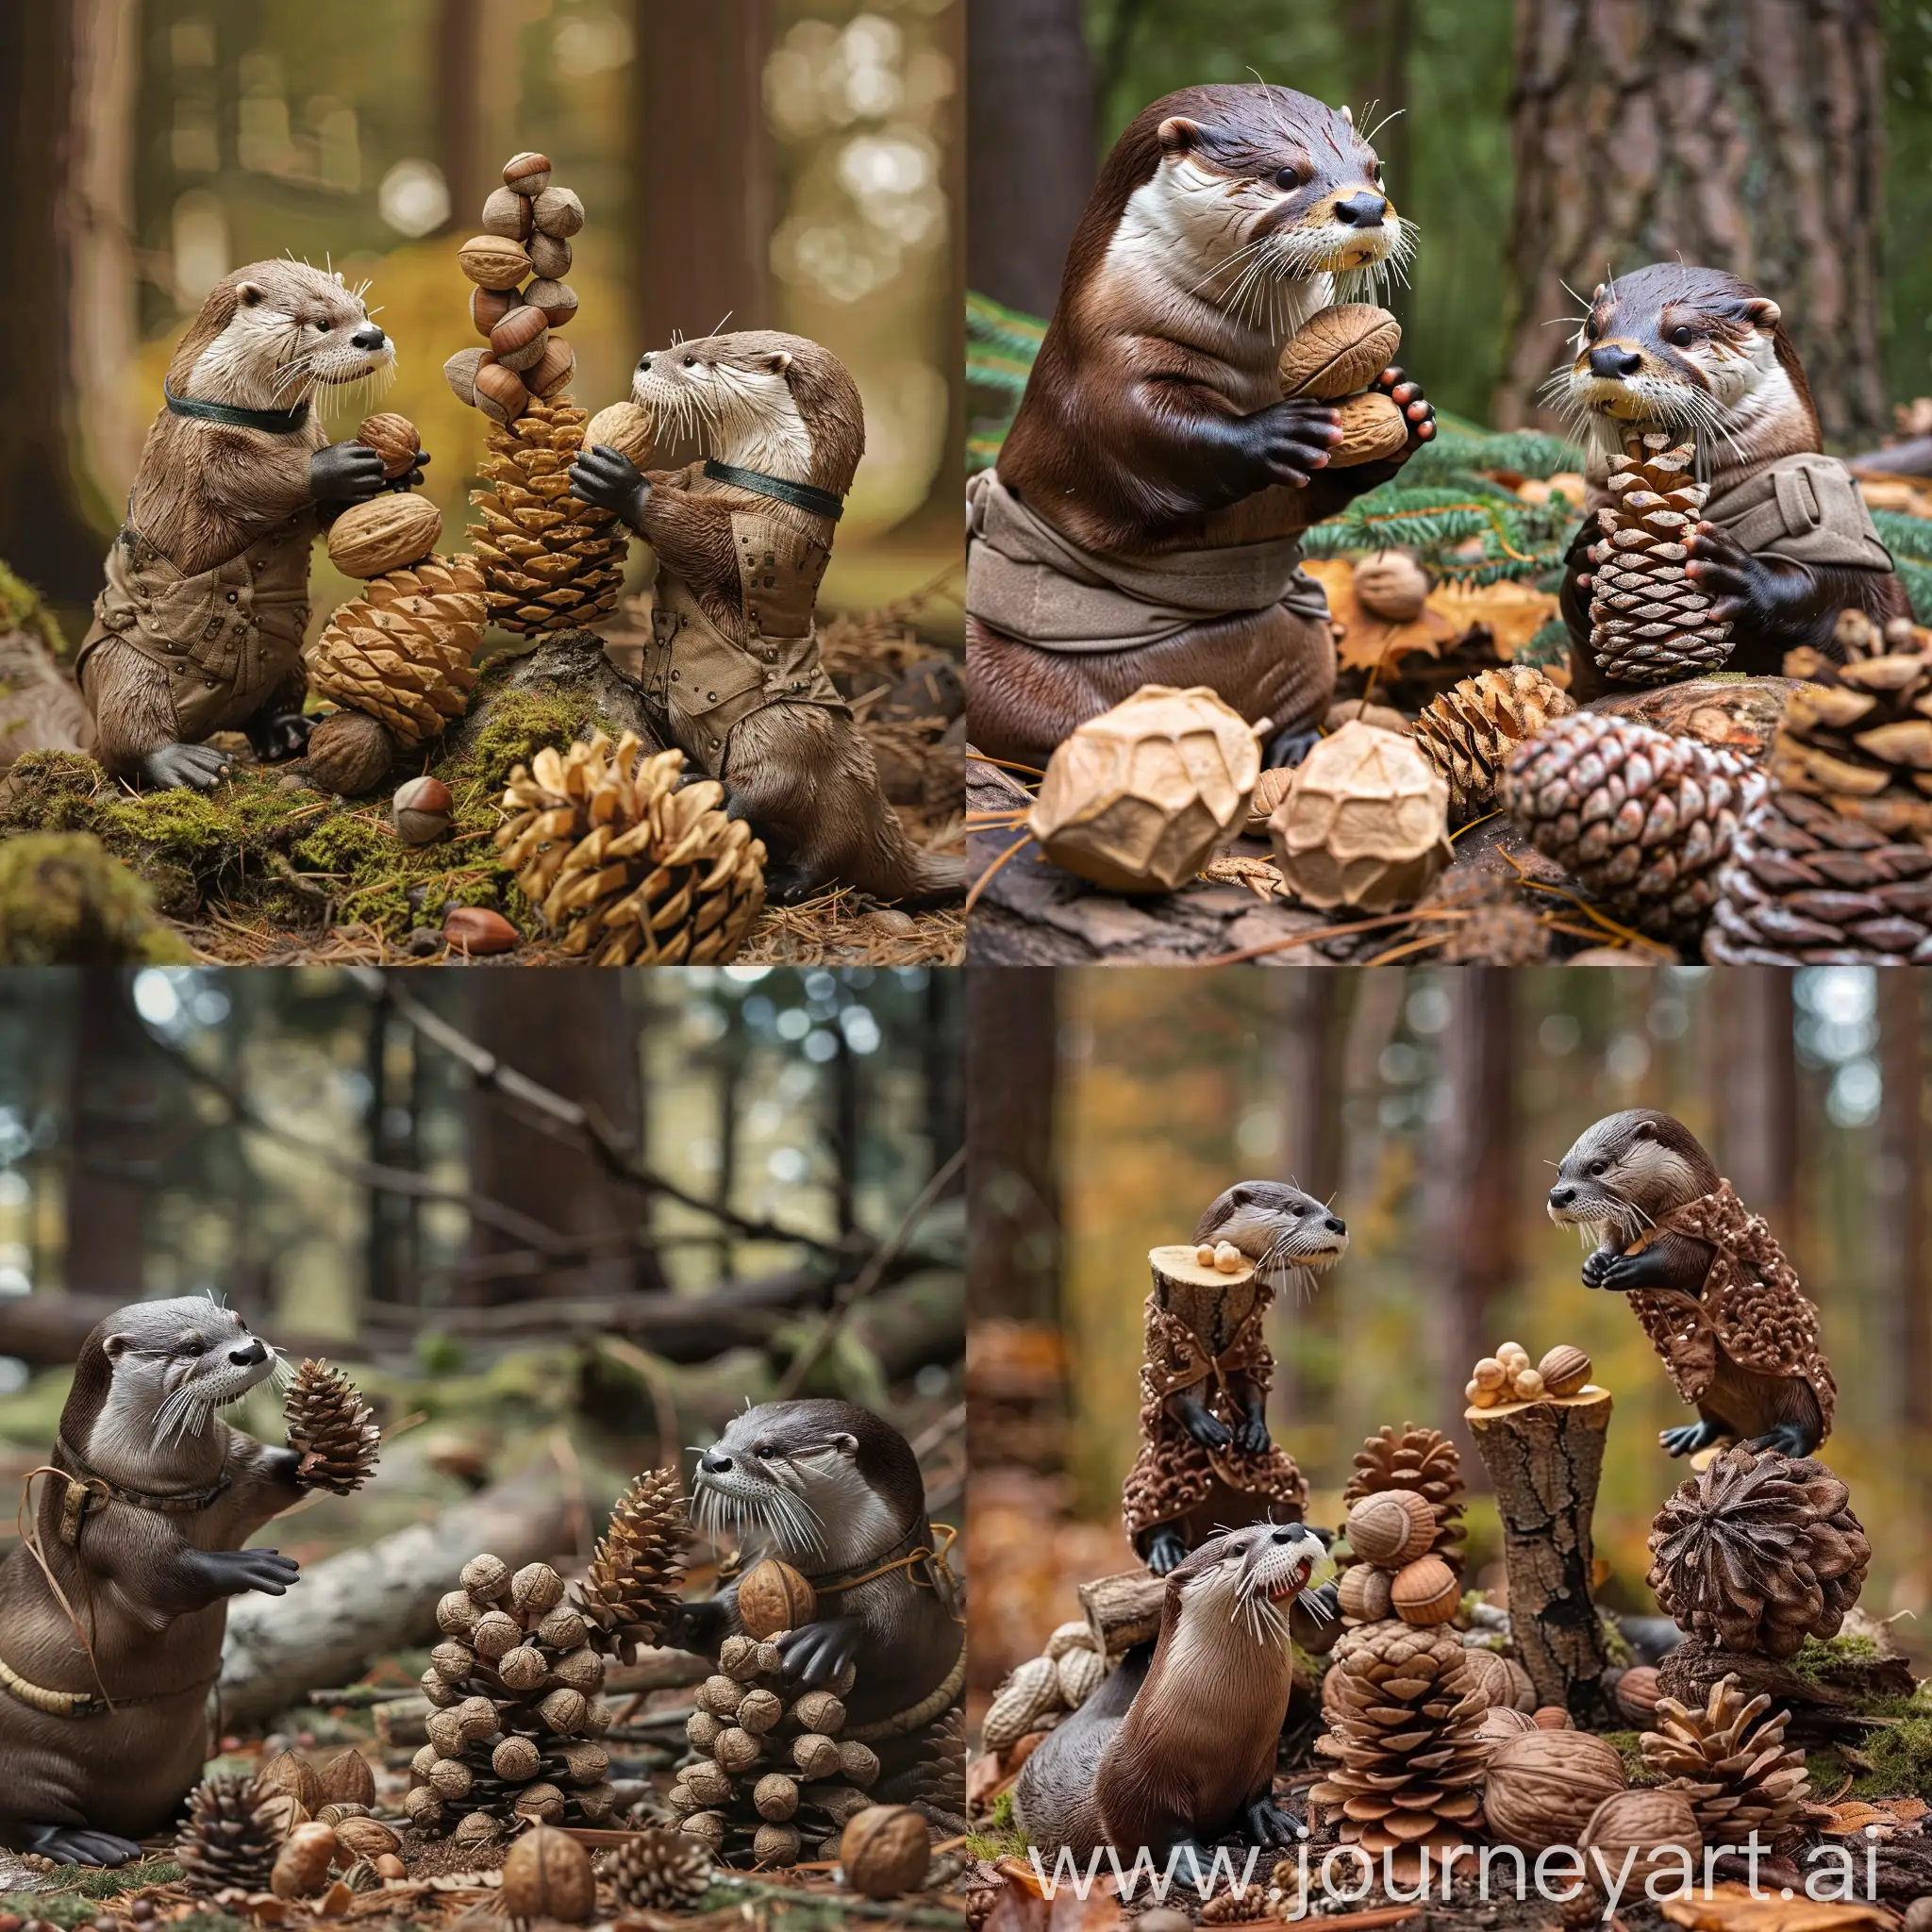 otters in gaiters in the forest stack pine cones and nuts
in a realistic way